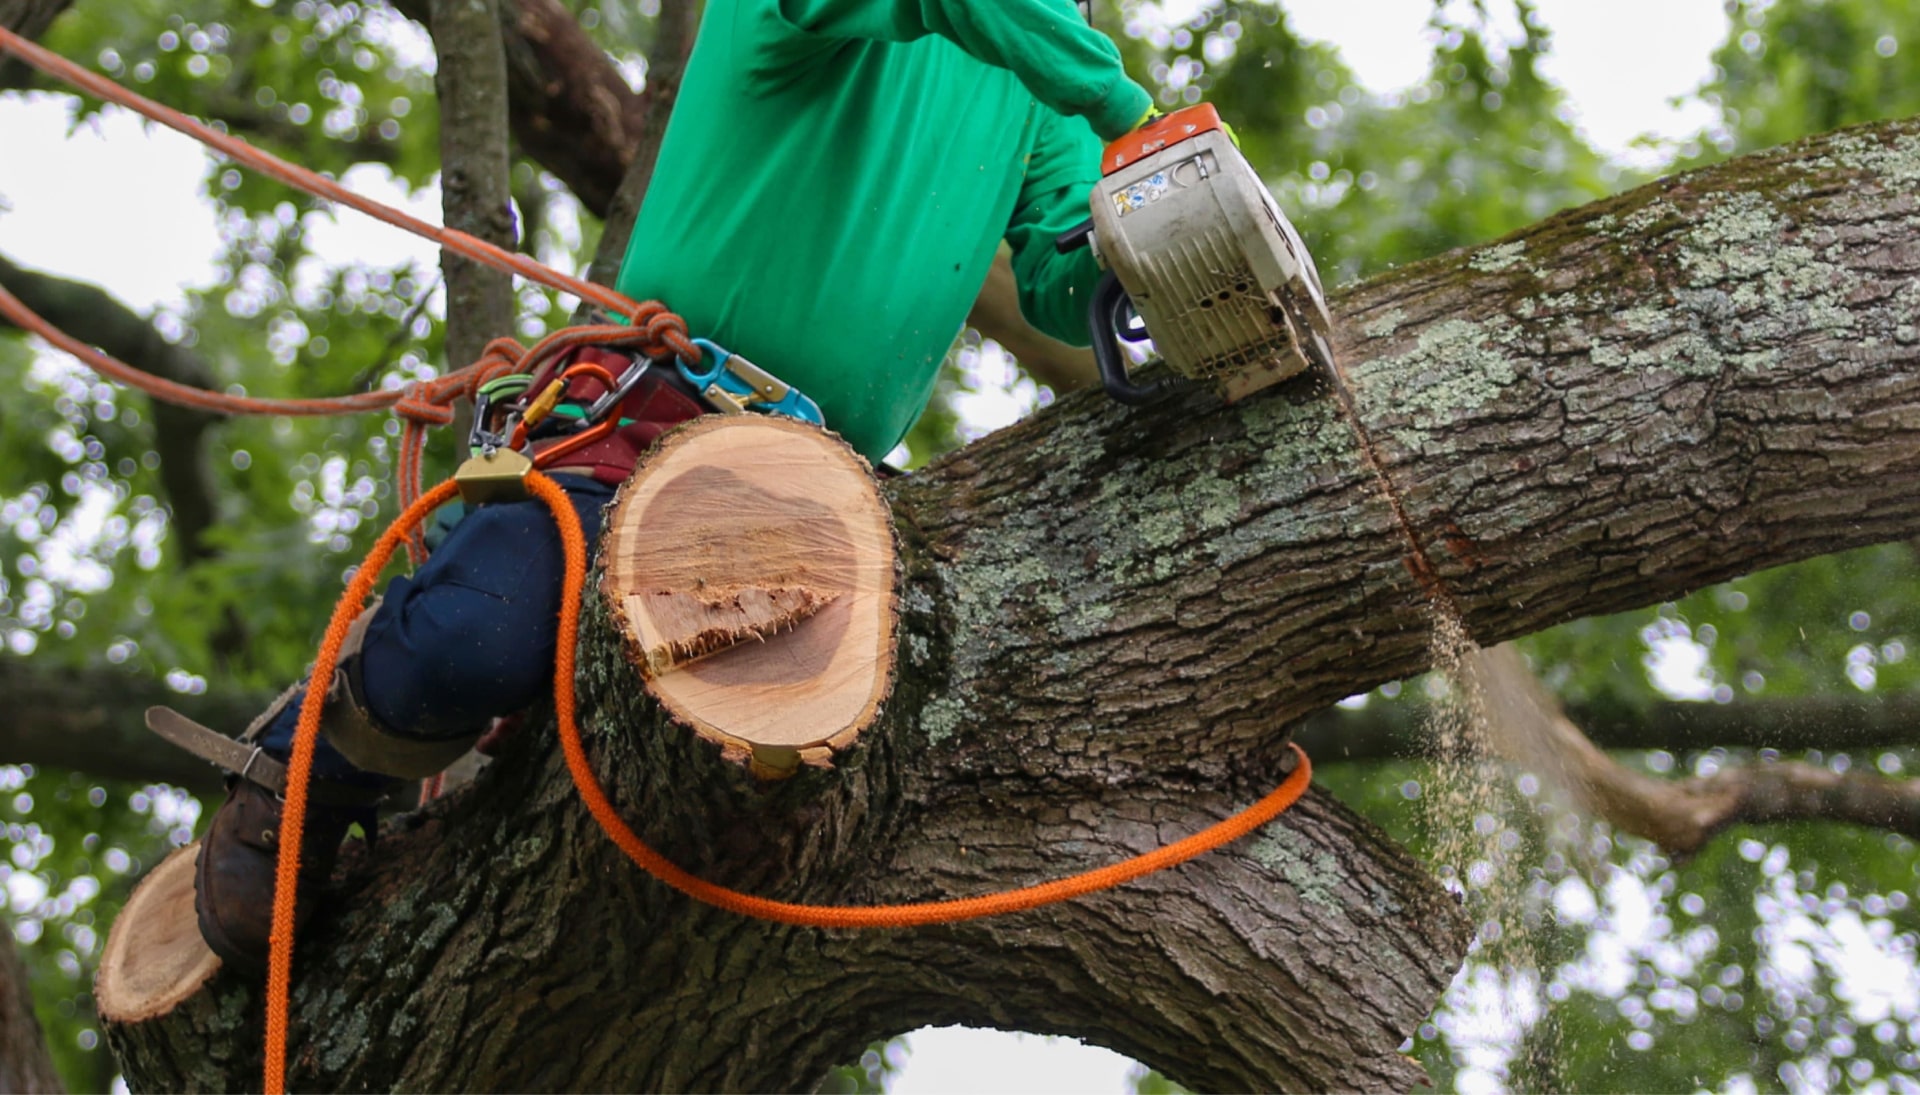 Shed your worries away with best tree removal in Guilford